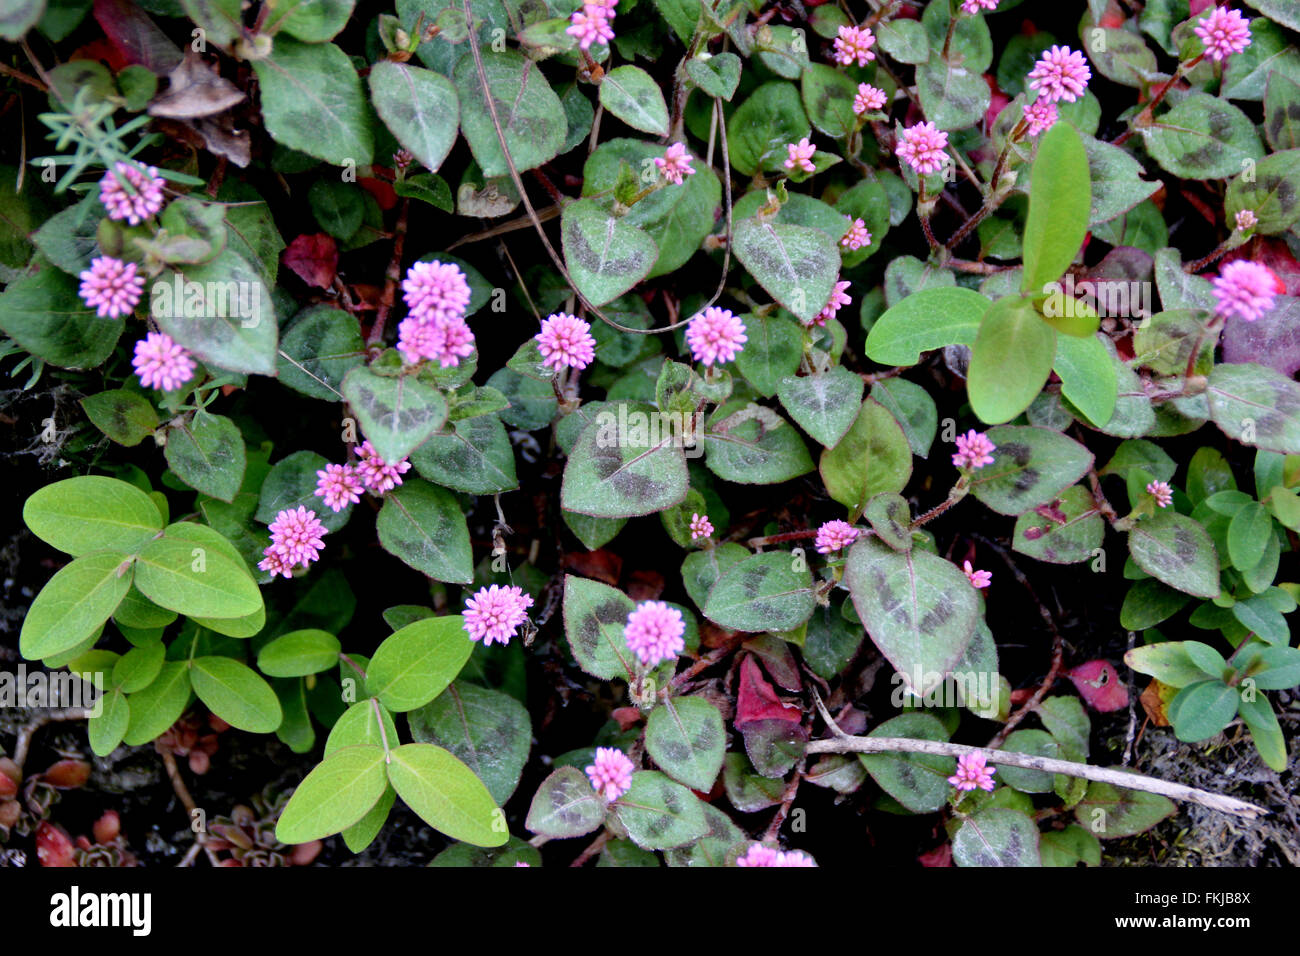 Persicaria capitata, Pink-headed knotweed, creeping perennial herb, leaves with two dark stripes,  pink flowers in heads Stock Photo